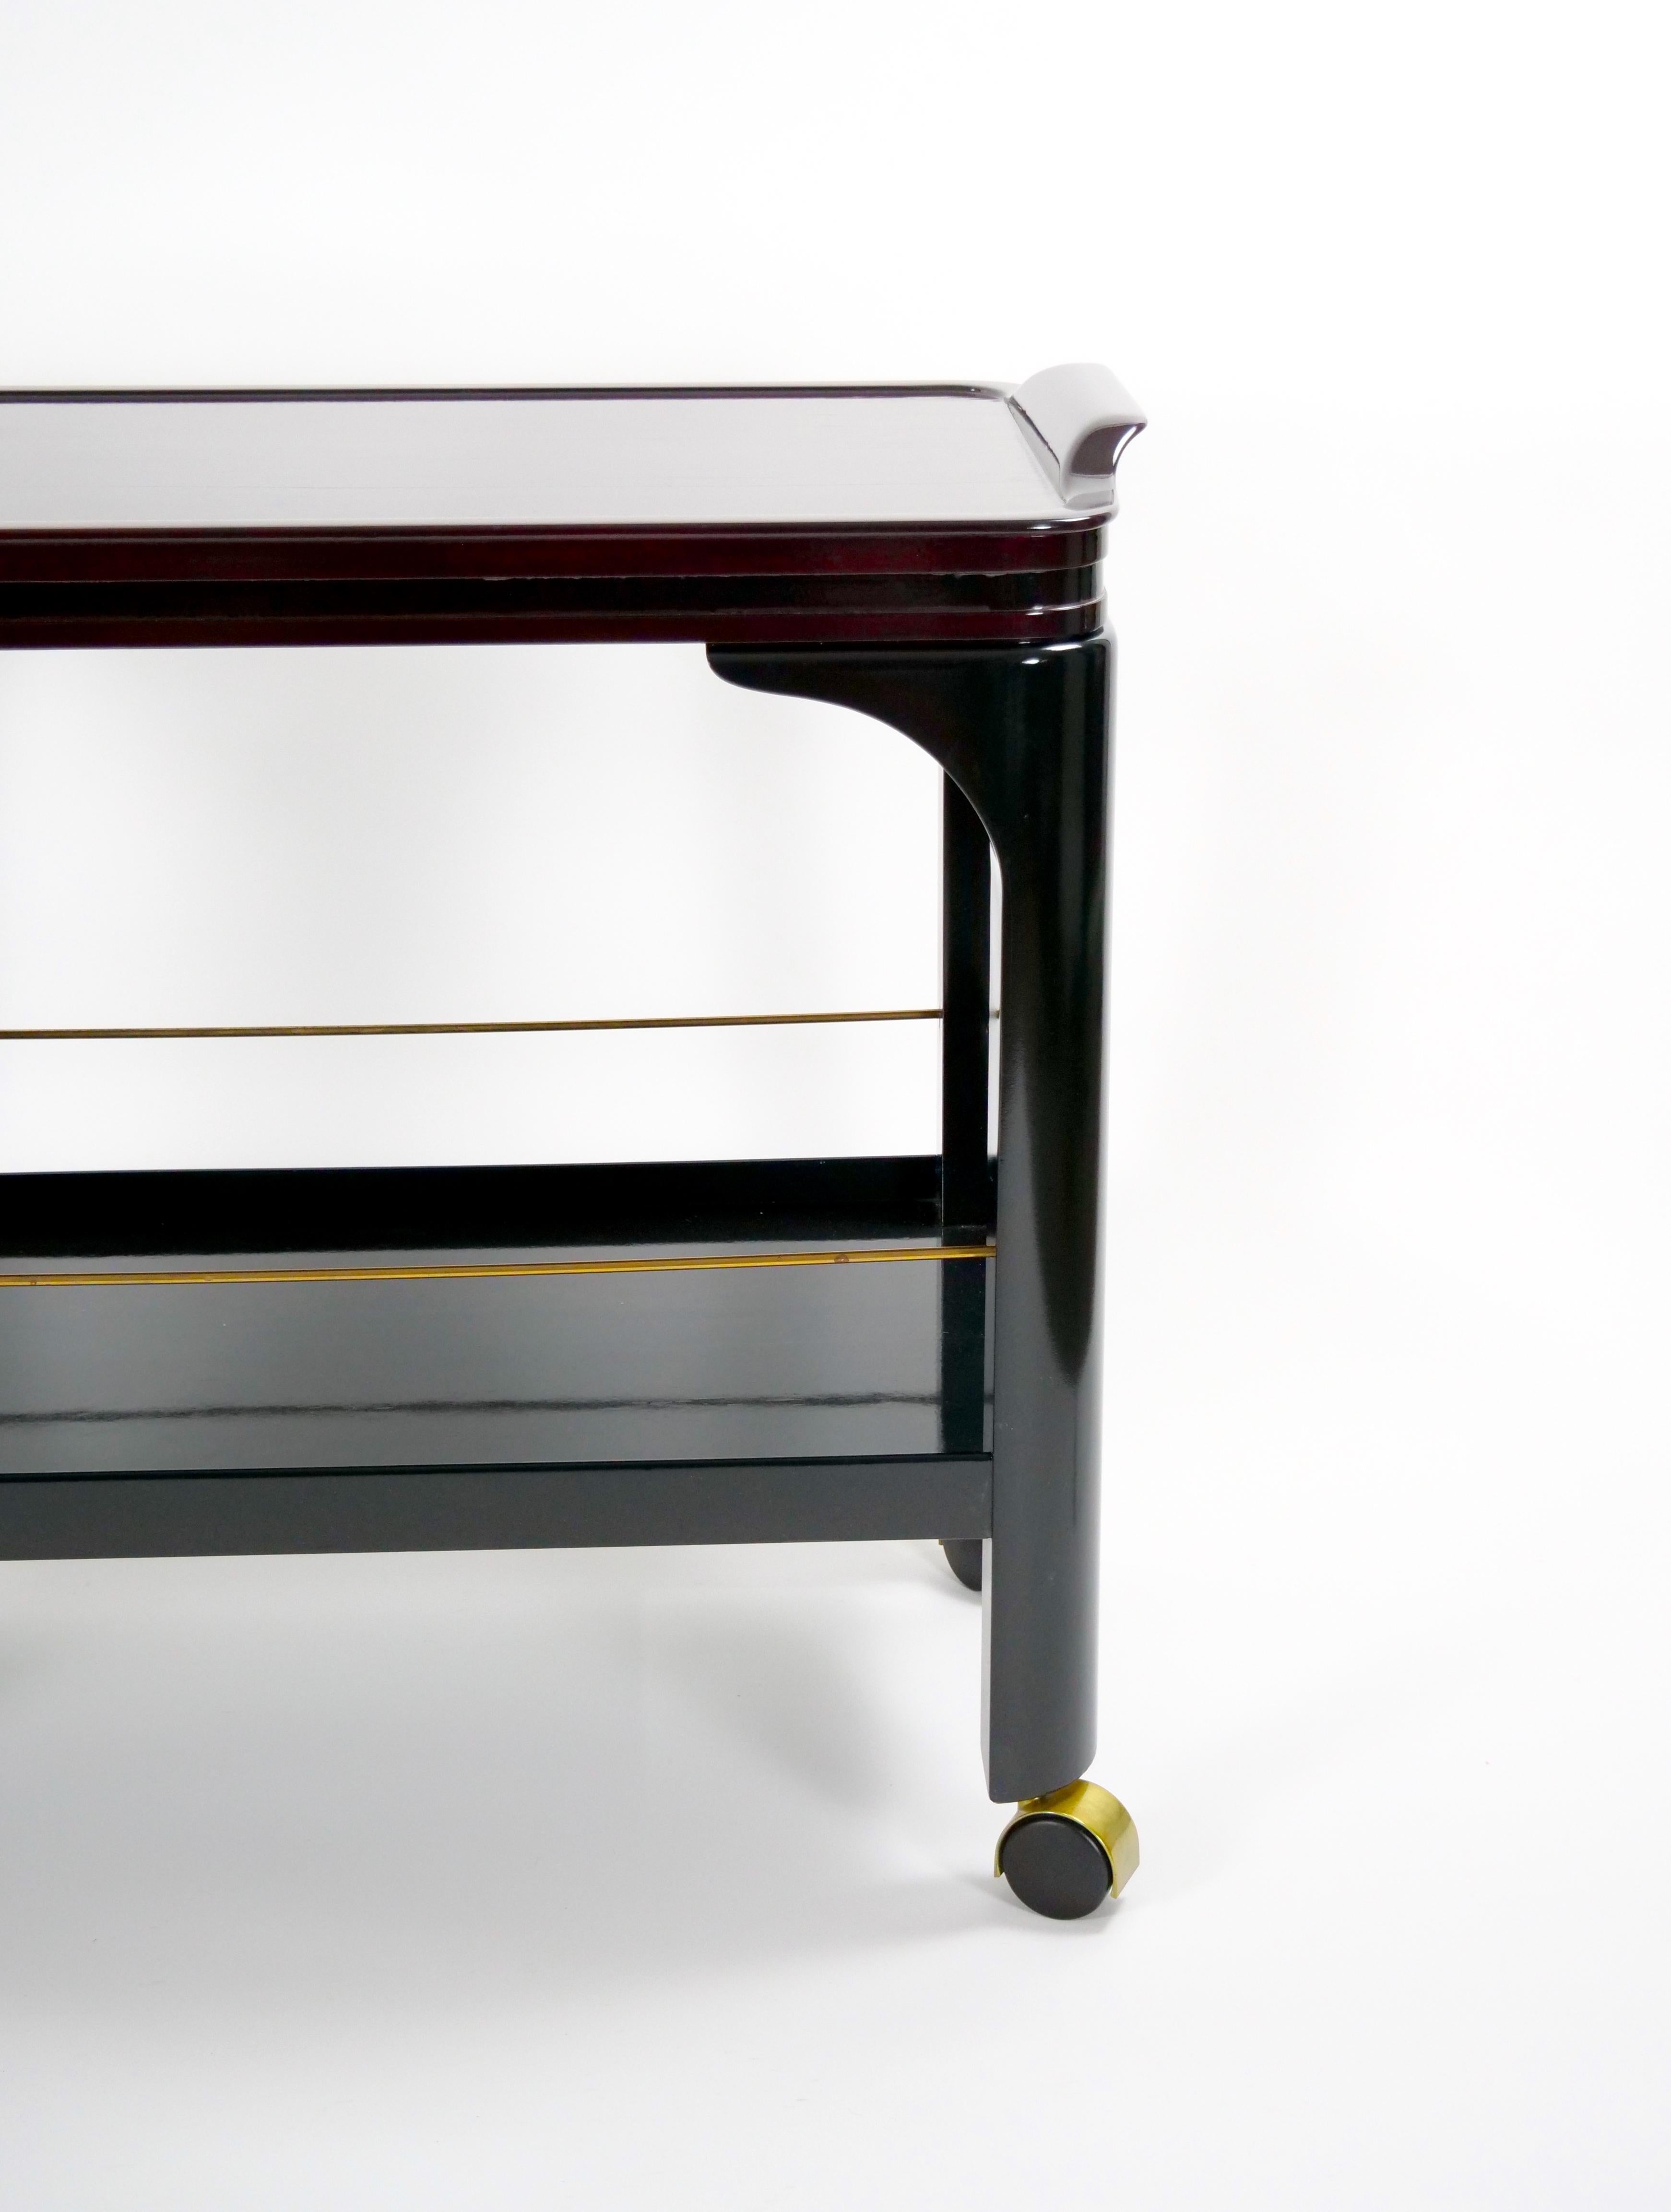 American  Paul Jones Black Brown lacquered Rolling Serving /Bar Cart, 1960s For Sale